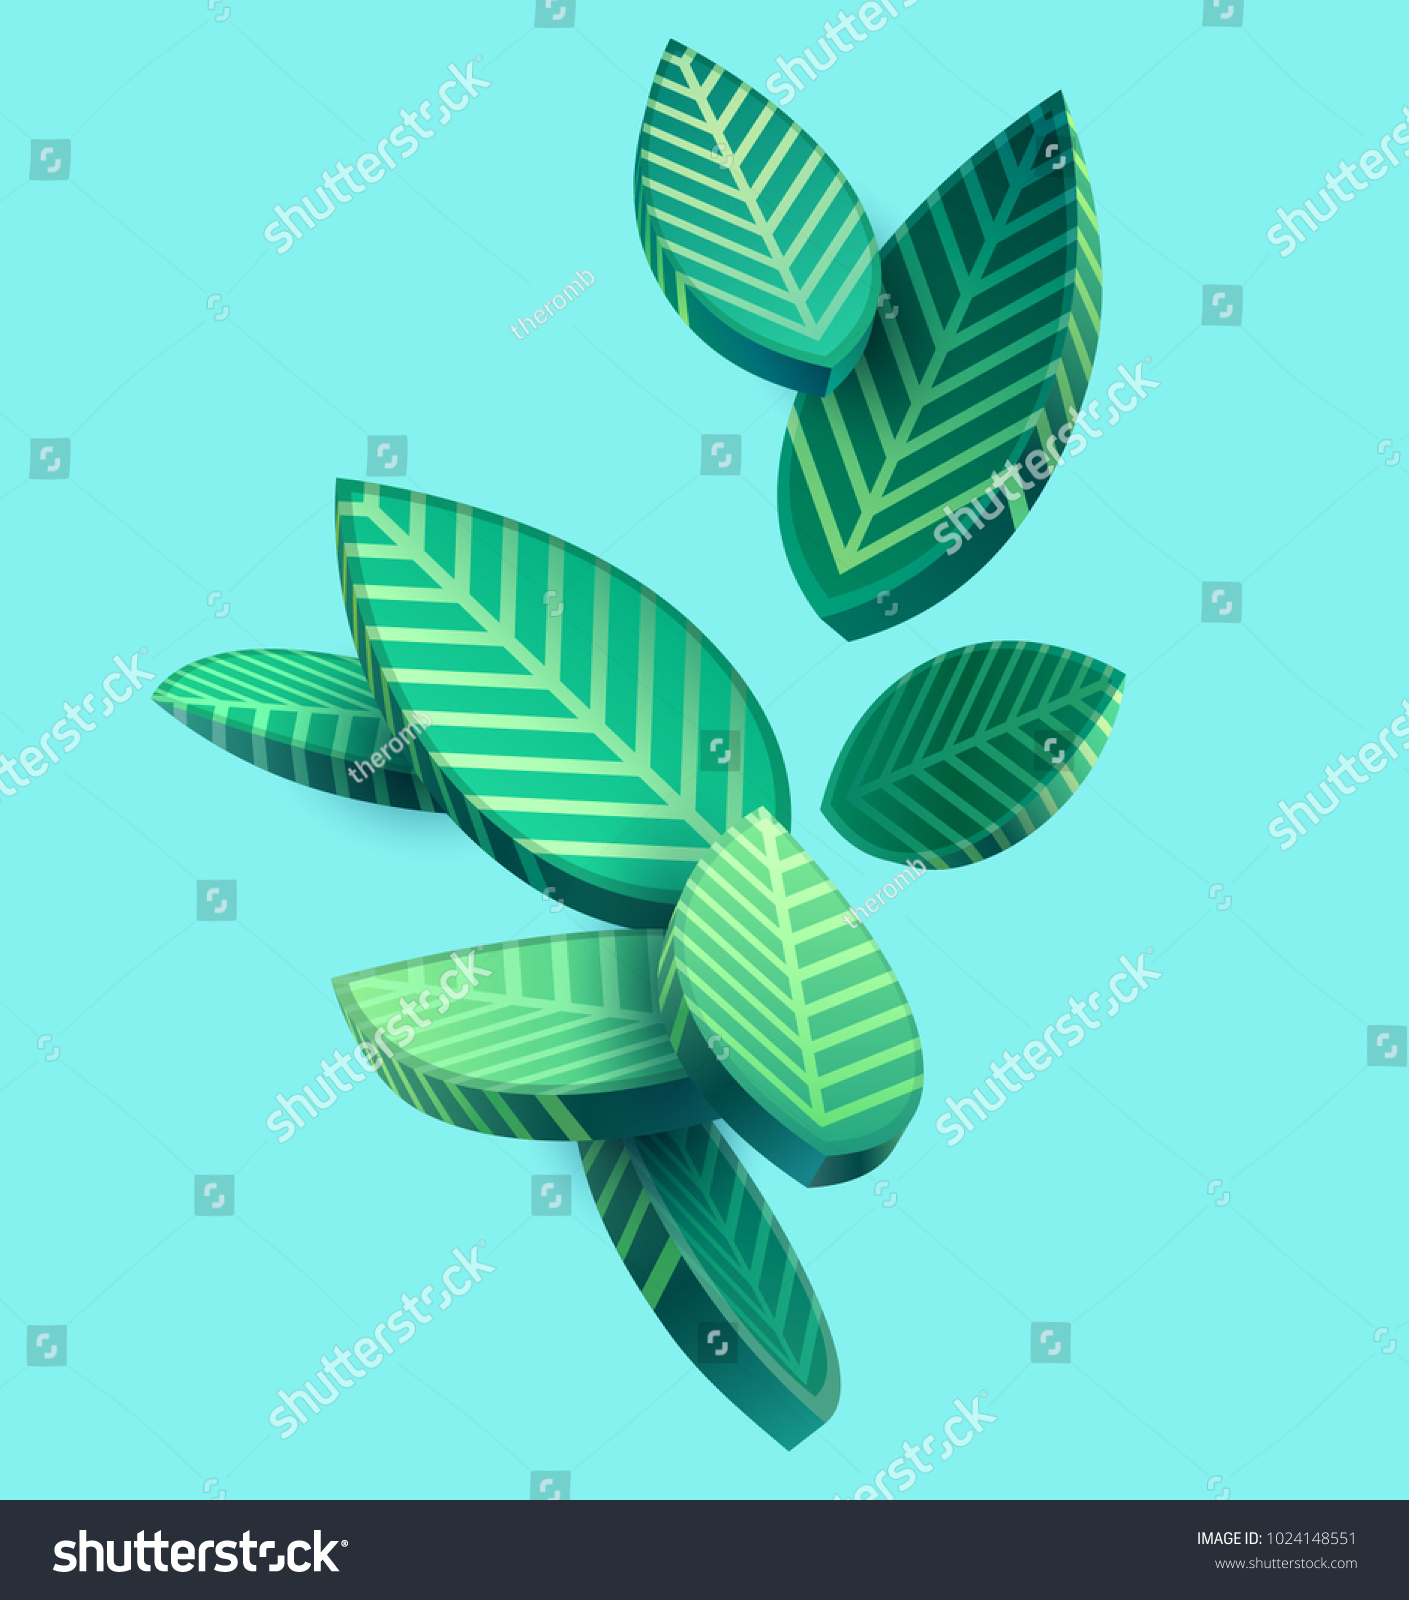 Composition of 3D stylized leaves  #1024148551